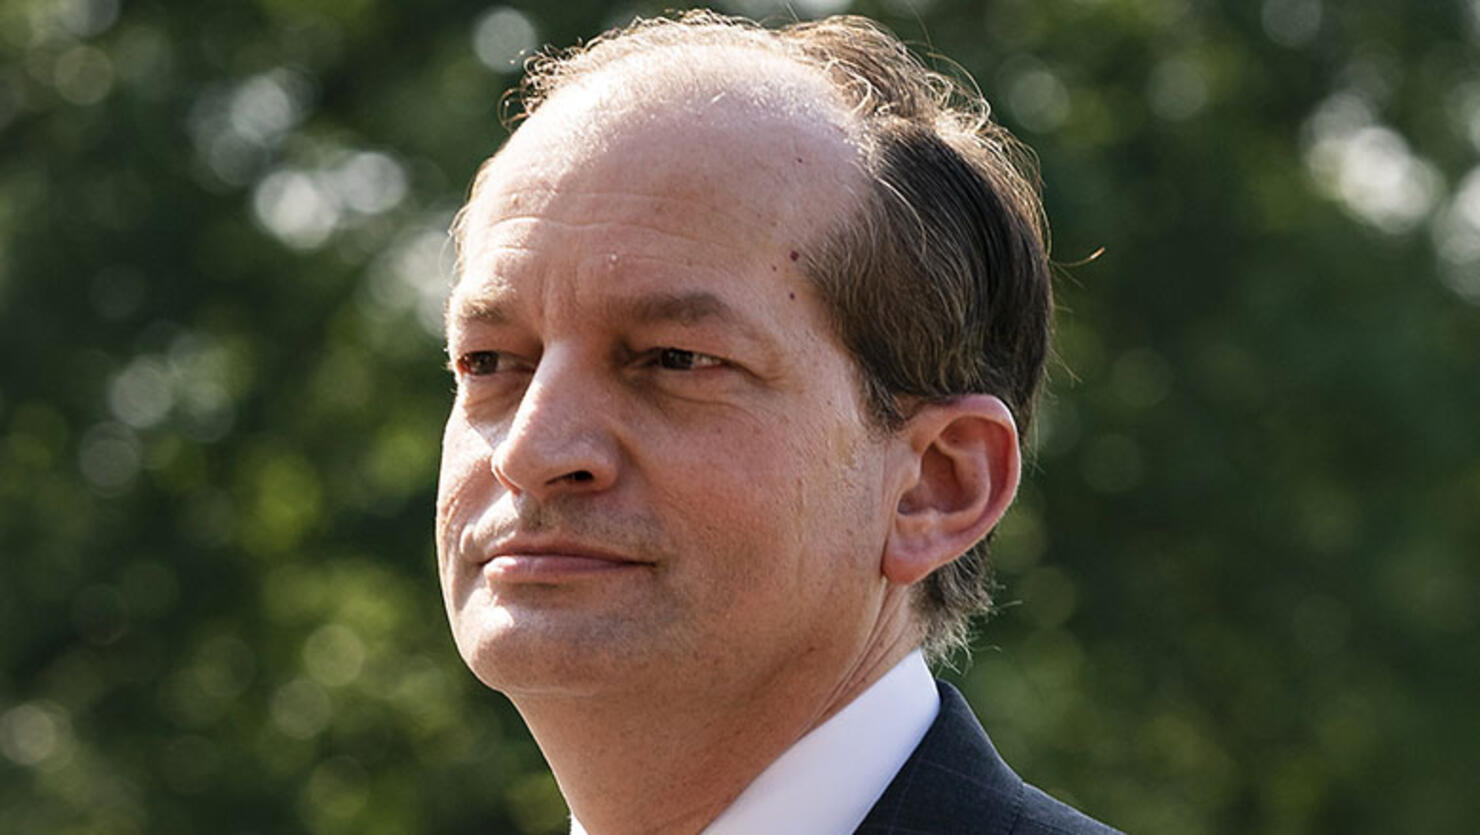 Labor Chief Acosta Resigns After Furor Over Epstein Sex Inquiry